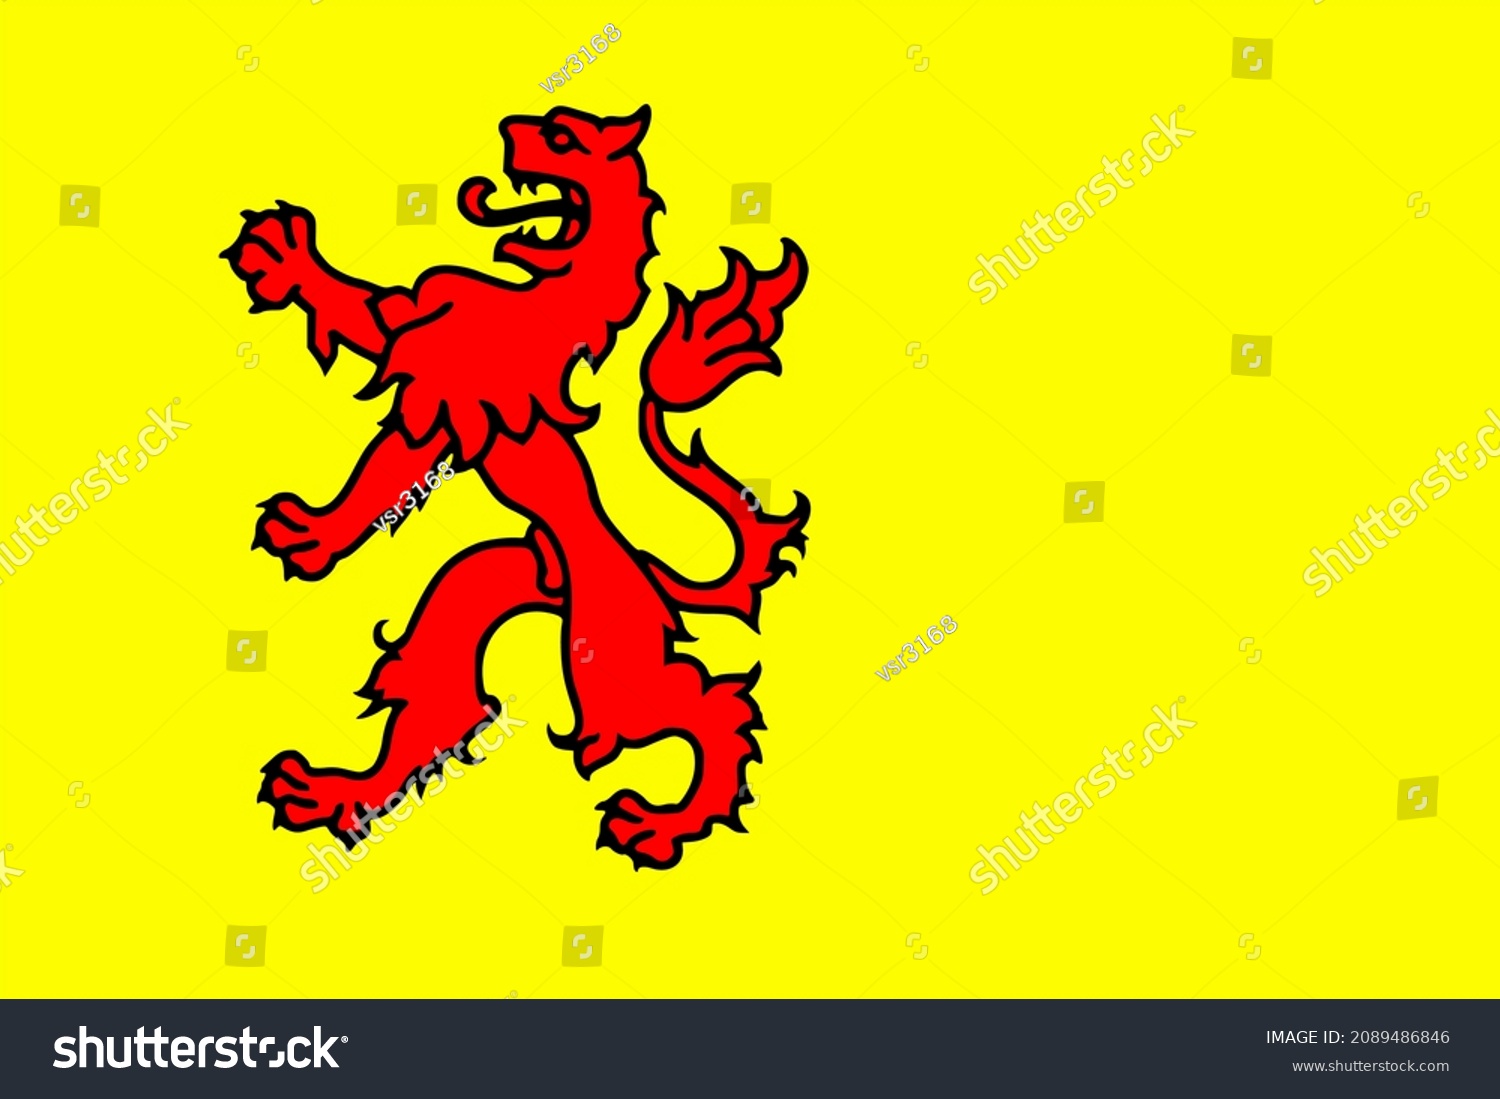 1,238 South holland flag Images, Stock Photos & Vectors | Shutterstock